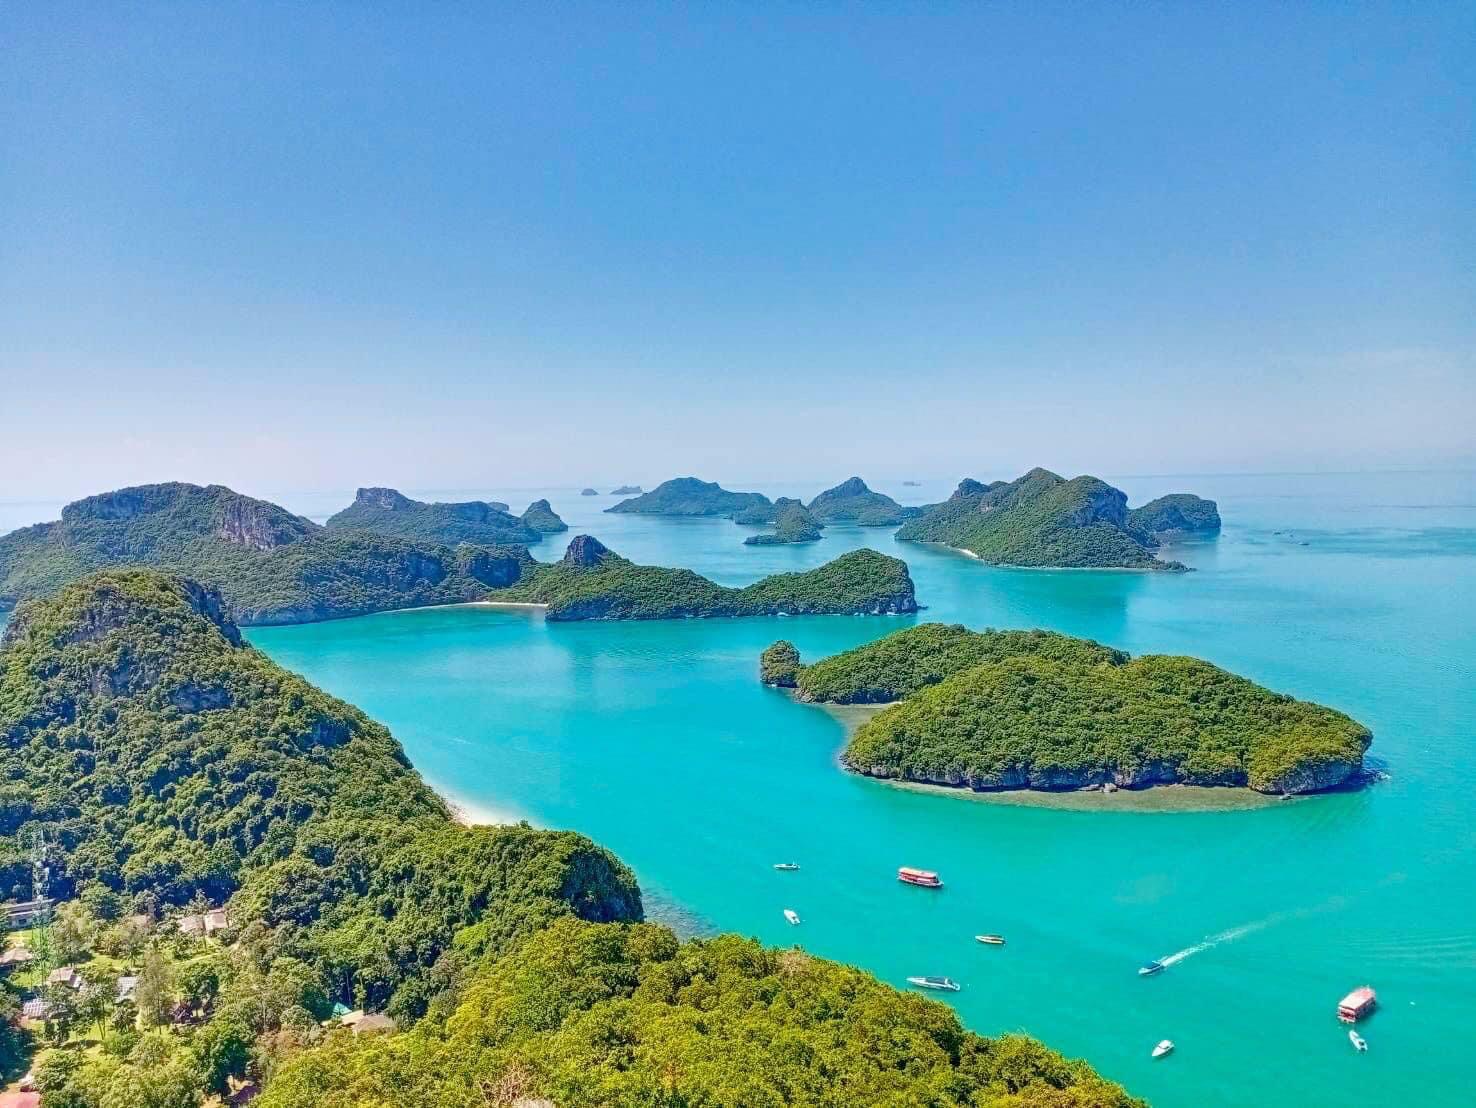 Aerial view of a tropical archipelago with emerald waters, lush green islands, and boats dotting the coastline.